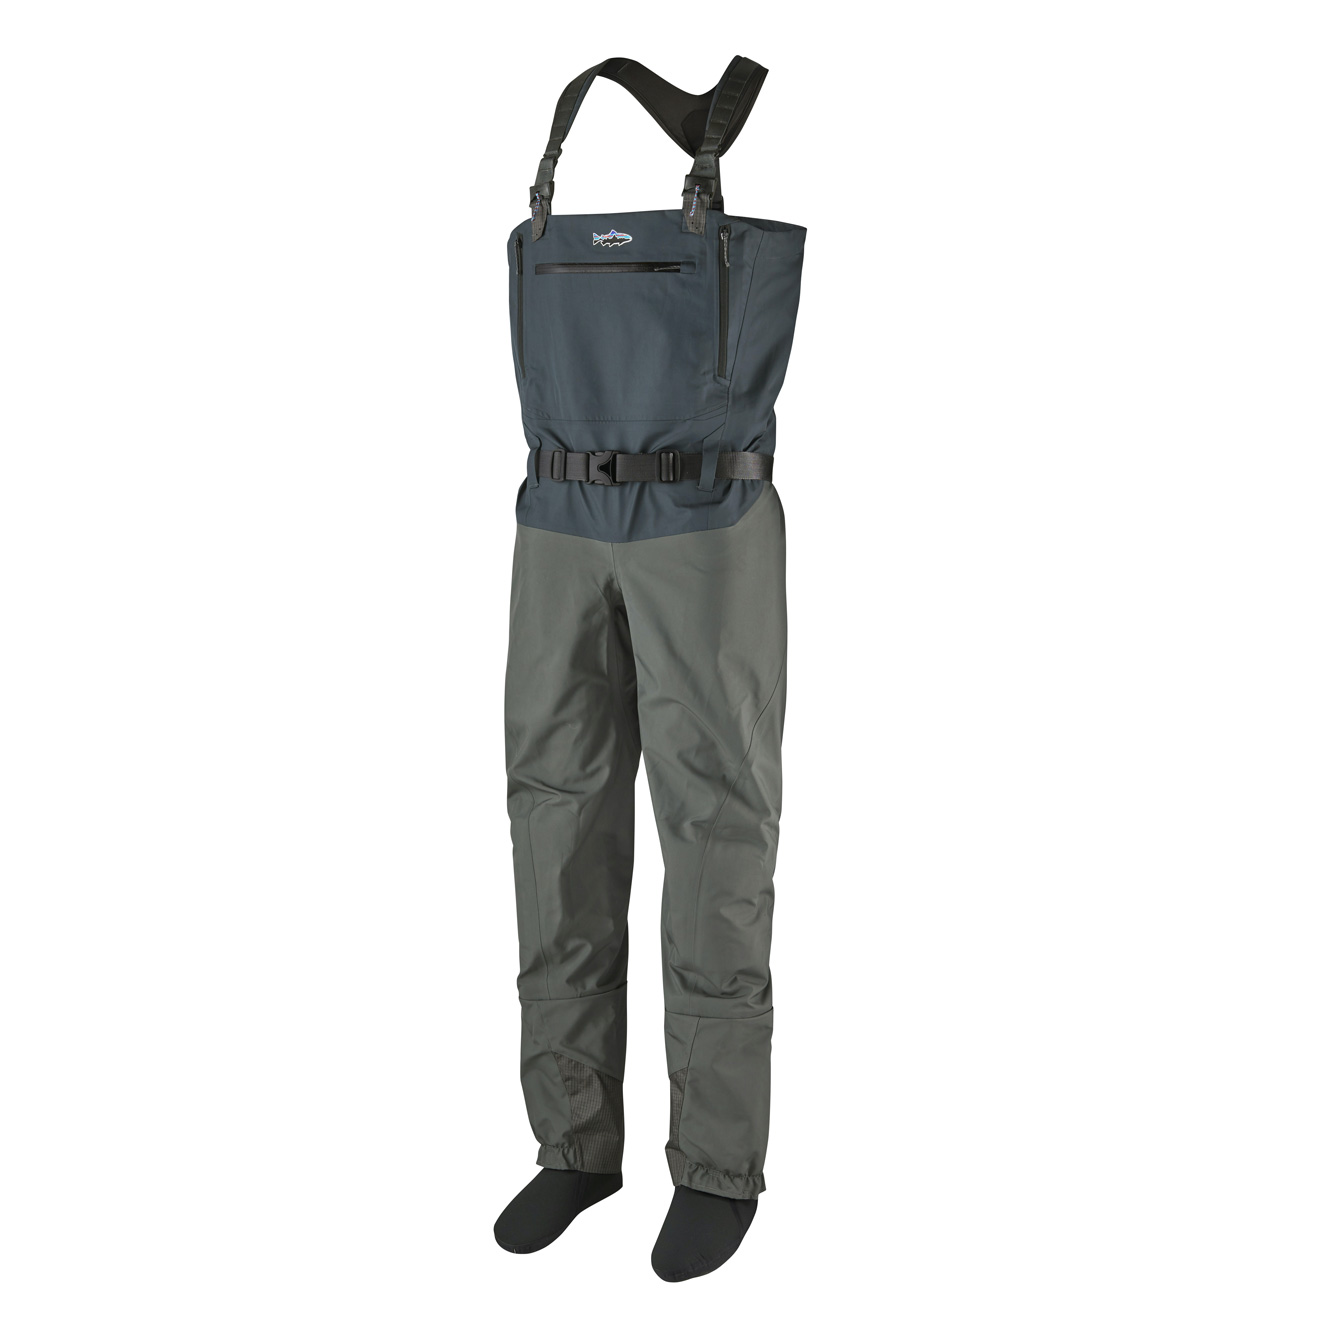 Patagonia Men's Swiftcurrent Expedition Wader - XRL